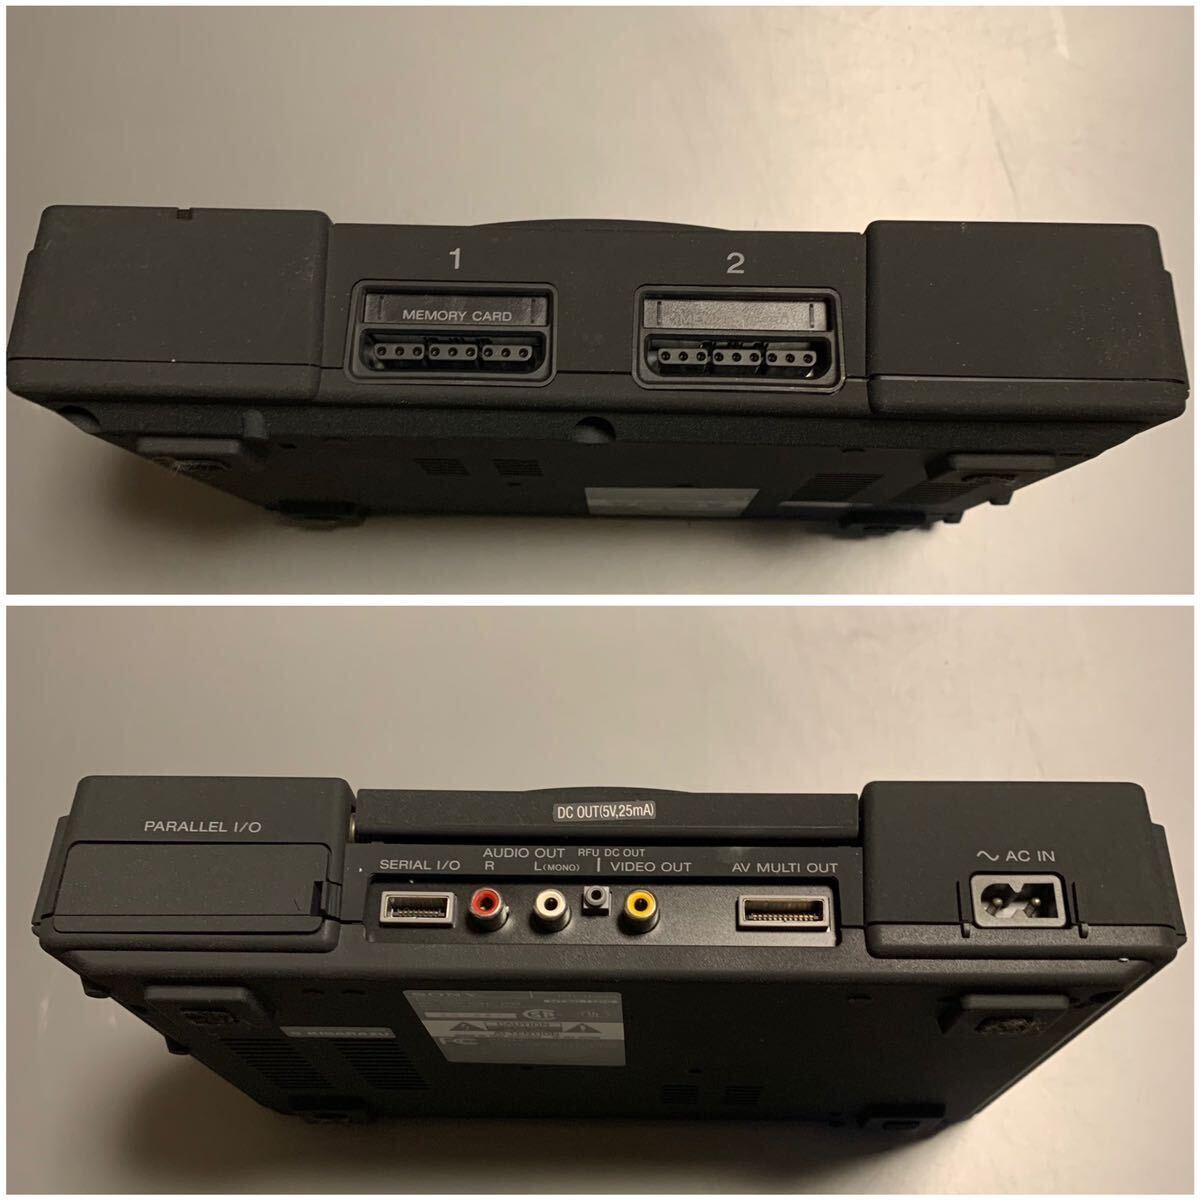 [ rare ]DTL-H3001/PlayStation/ PlayStation / North America version / development machine / net ..../ box instructions attaching / black stereo /SONY/ Sony / PlayStation /PS/ operation goods 